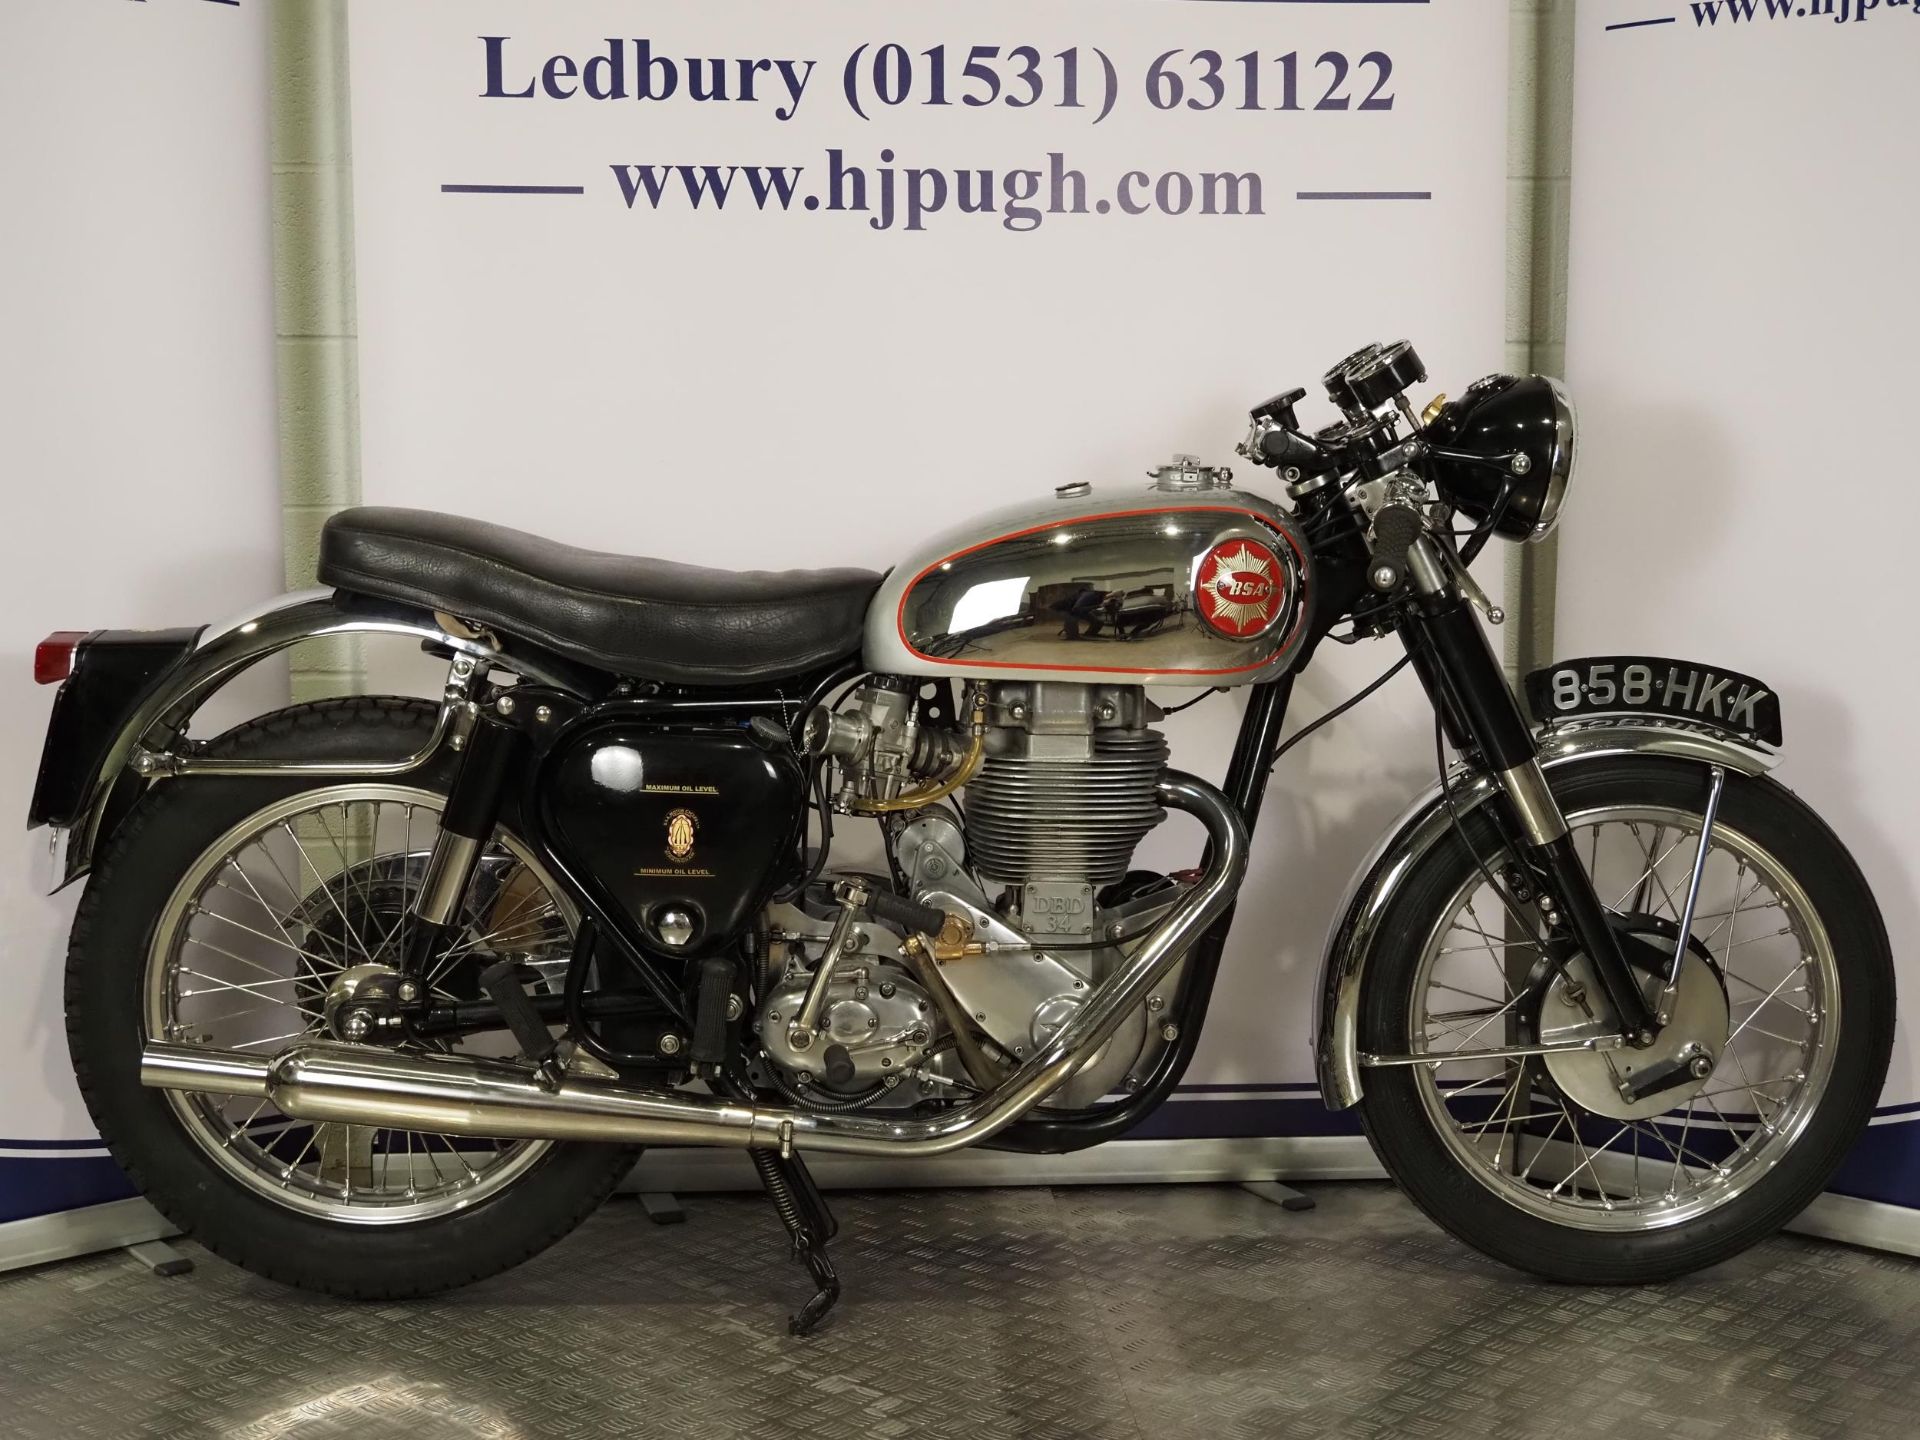 BSA Goldstar DBD 34 motorcycle. 1959. 500cc Frame No. CB328879 Engine No. DBD34GS4715 Fitted with - Image 4 of 10